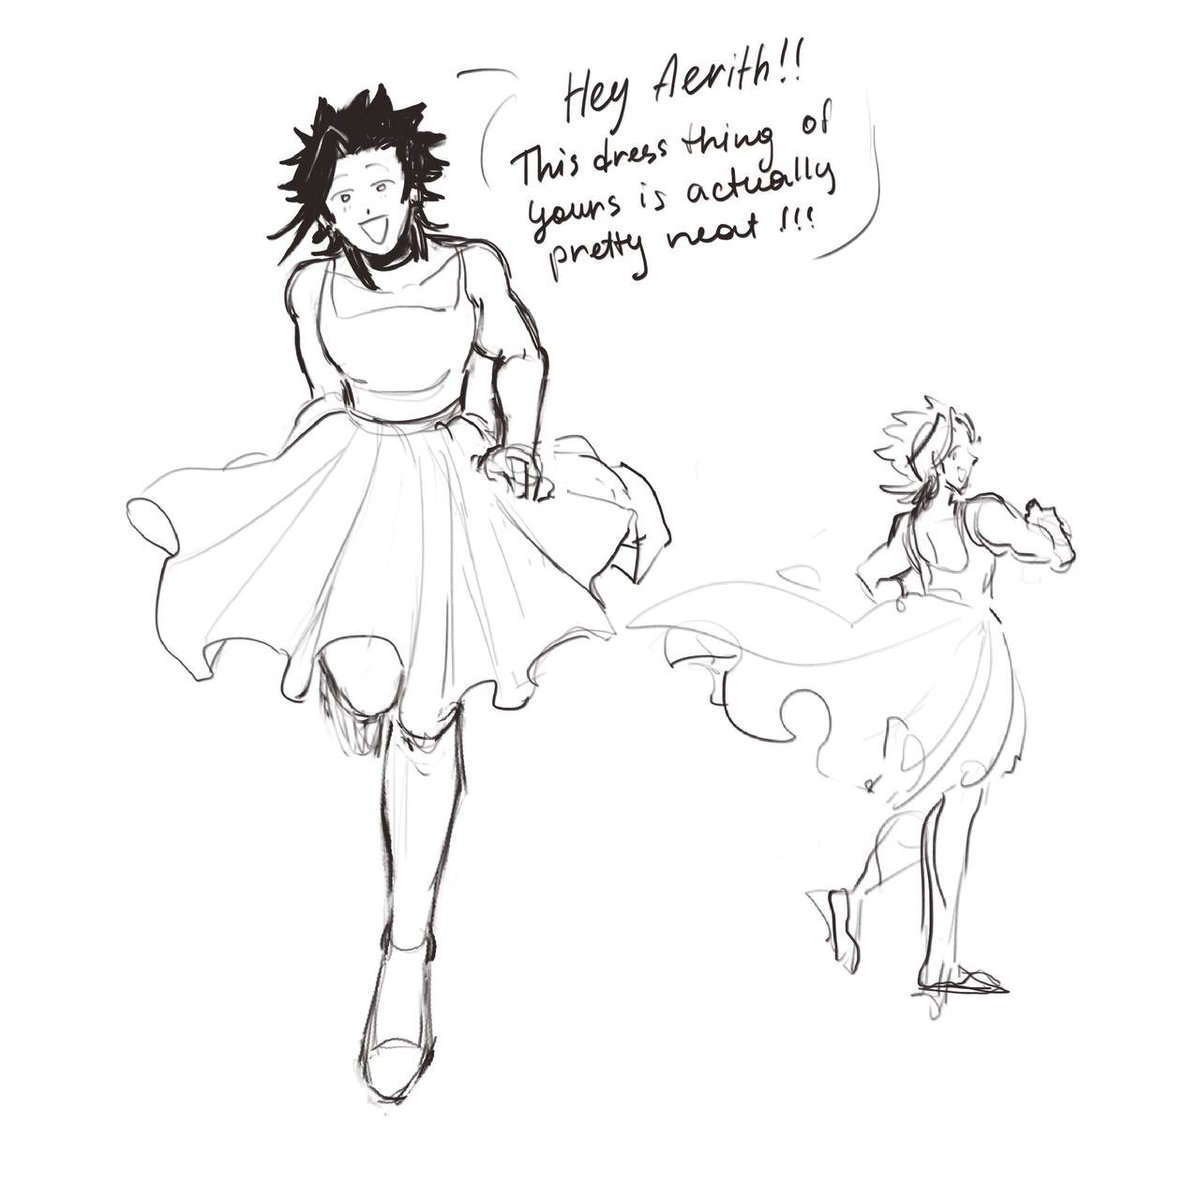 i drew zack in a dress and im not explaining why. dont ask. #zackfair #ff7 #crisiscore #ff7r 